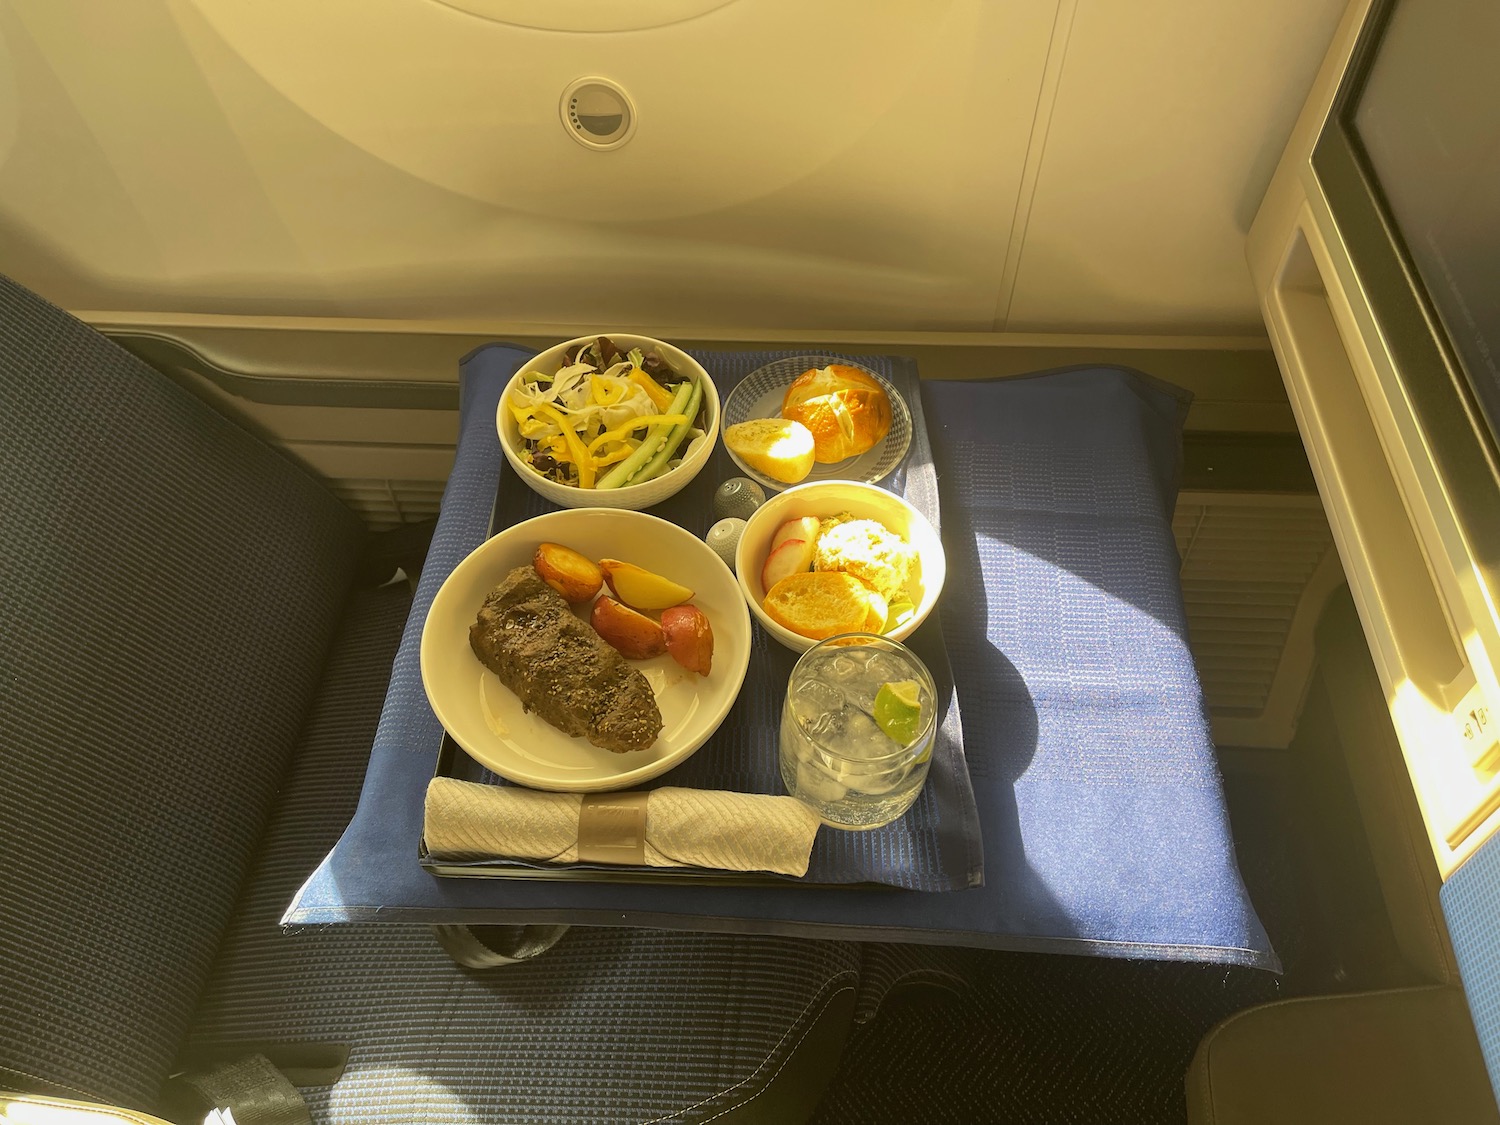 a tray of food on a seat